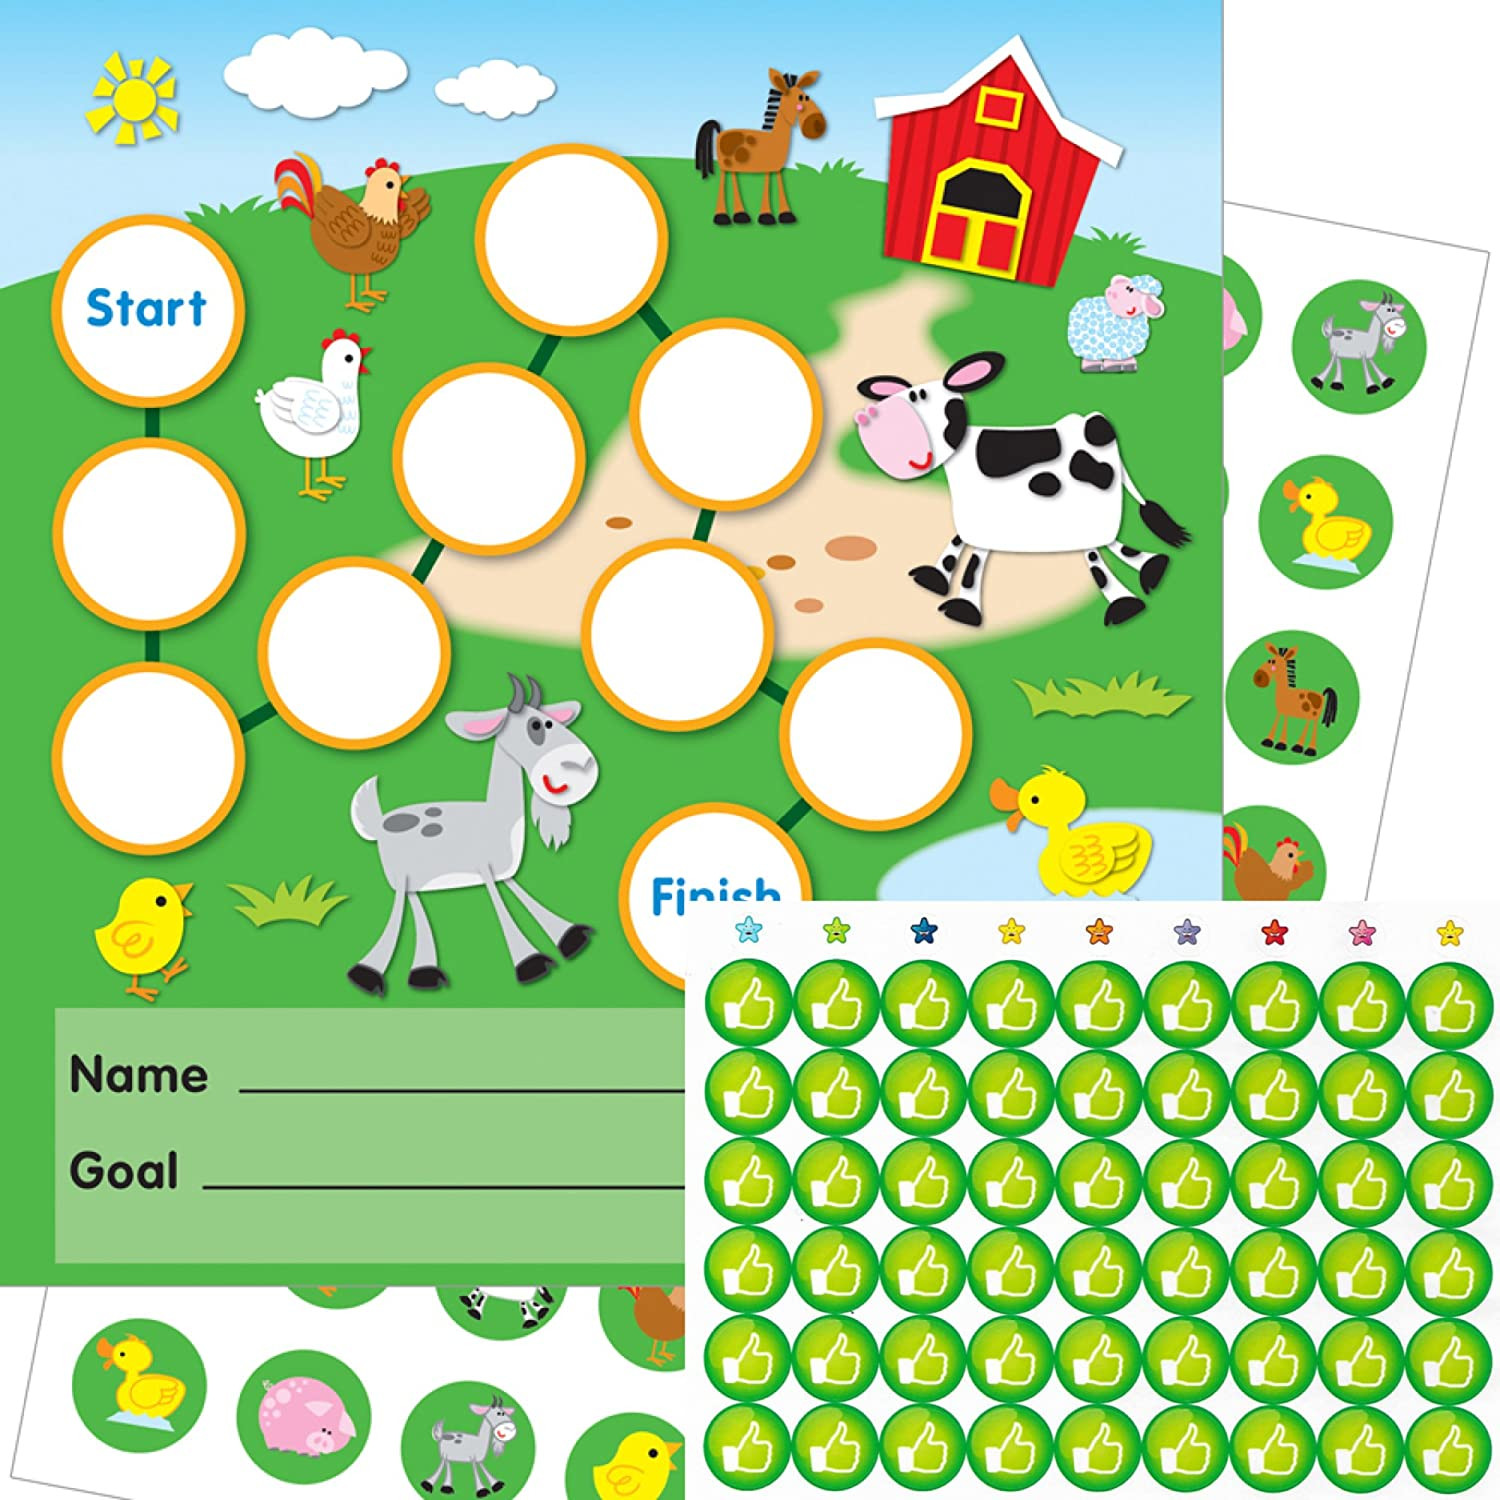 What Do We Get From Farm Animals Chart